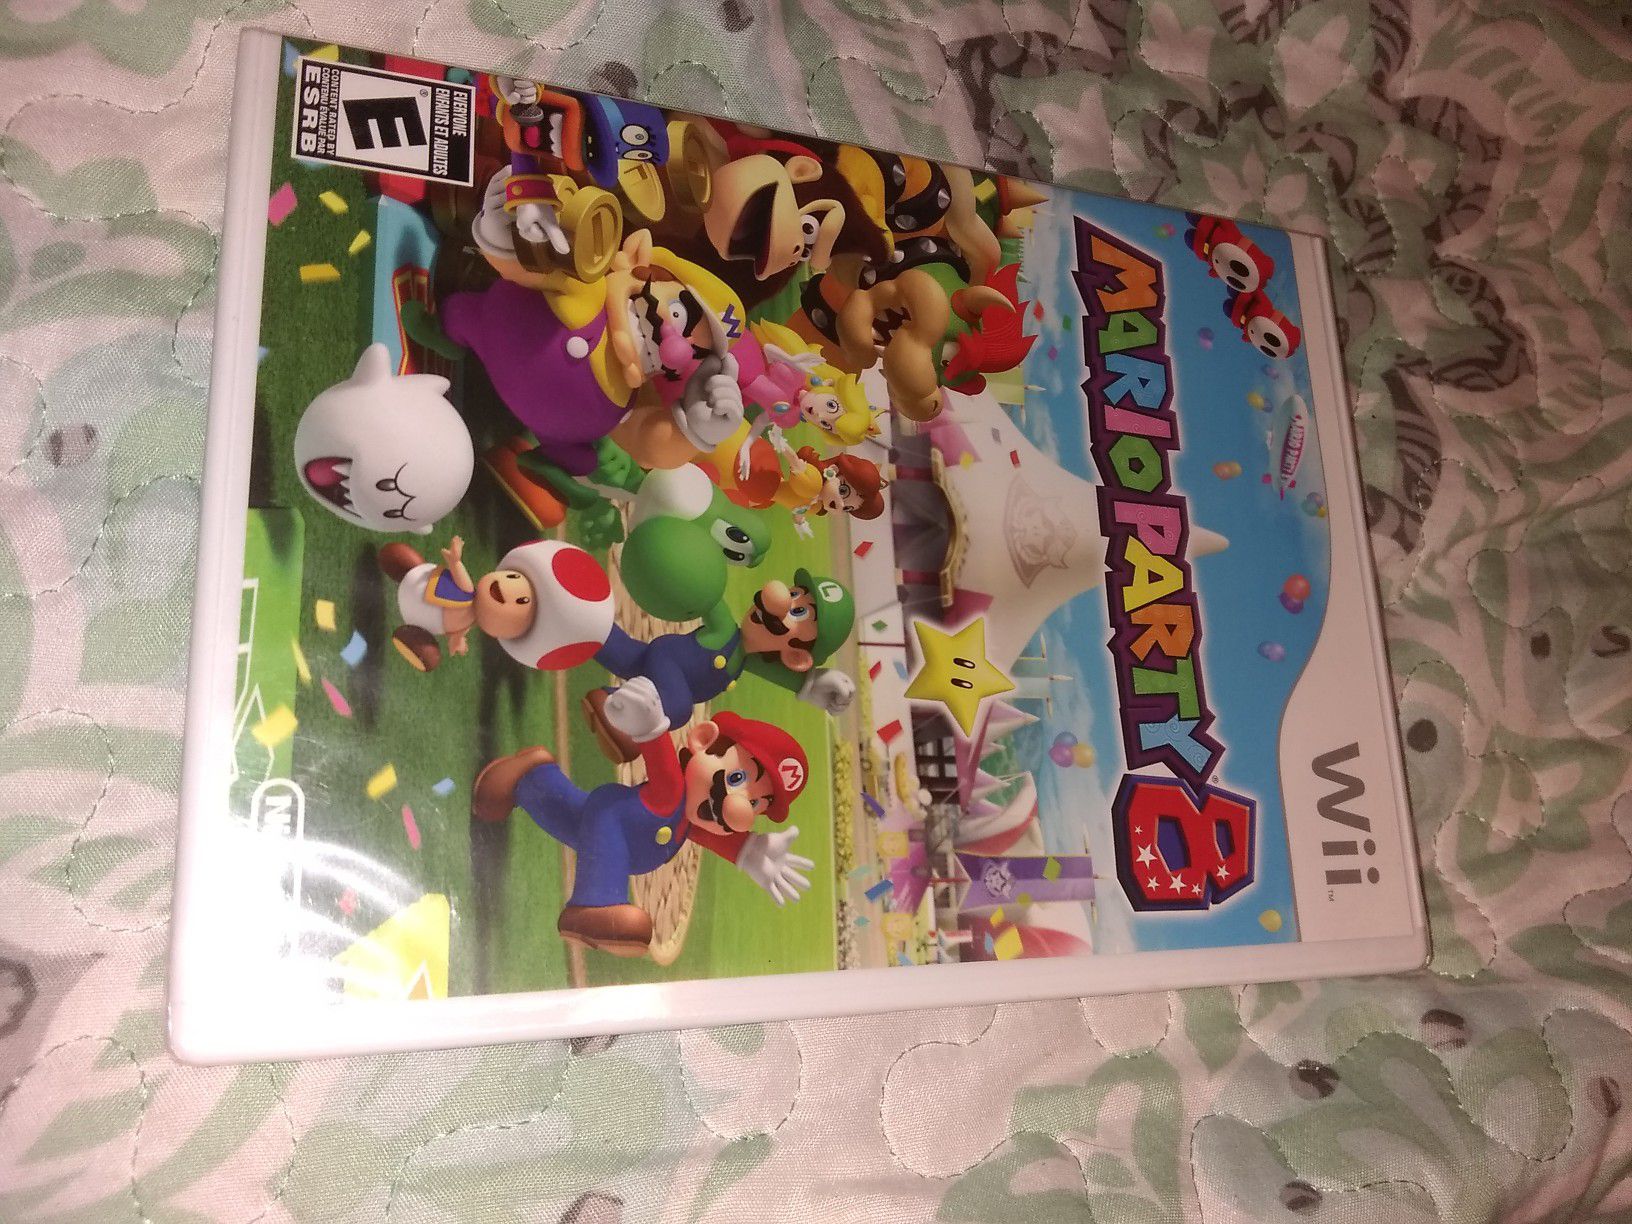 Mario party 8 new seald never opened $45